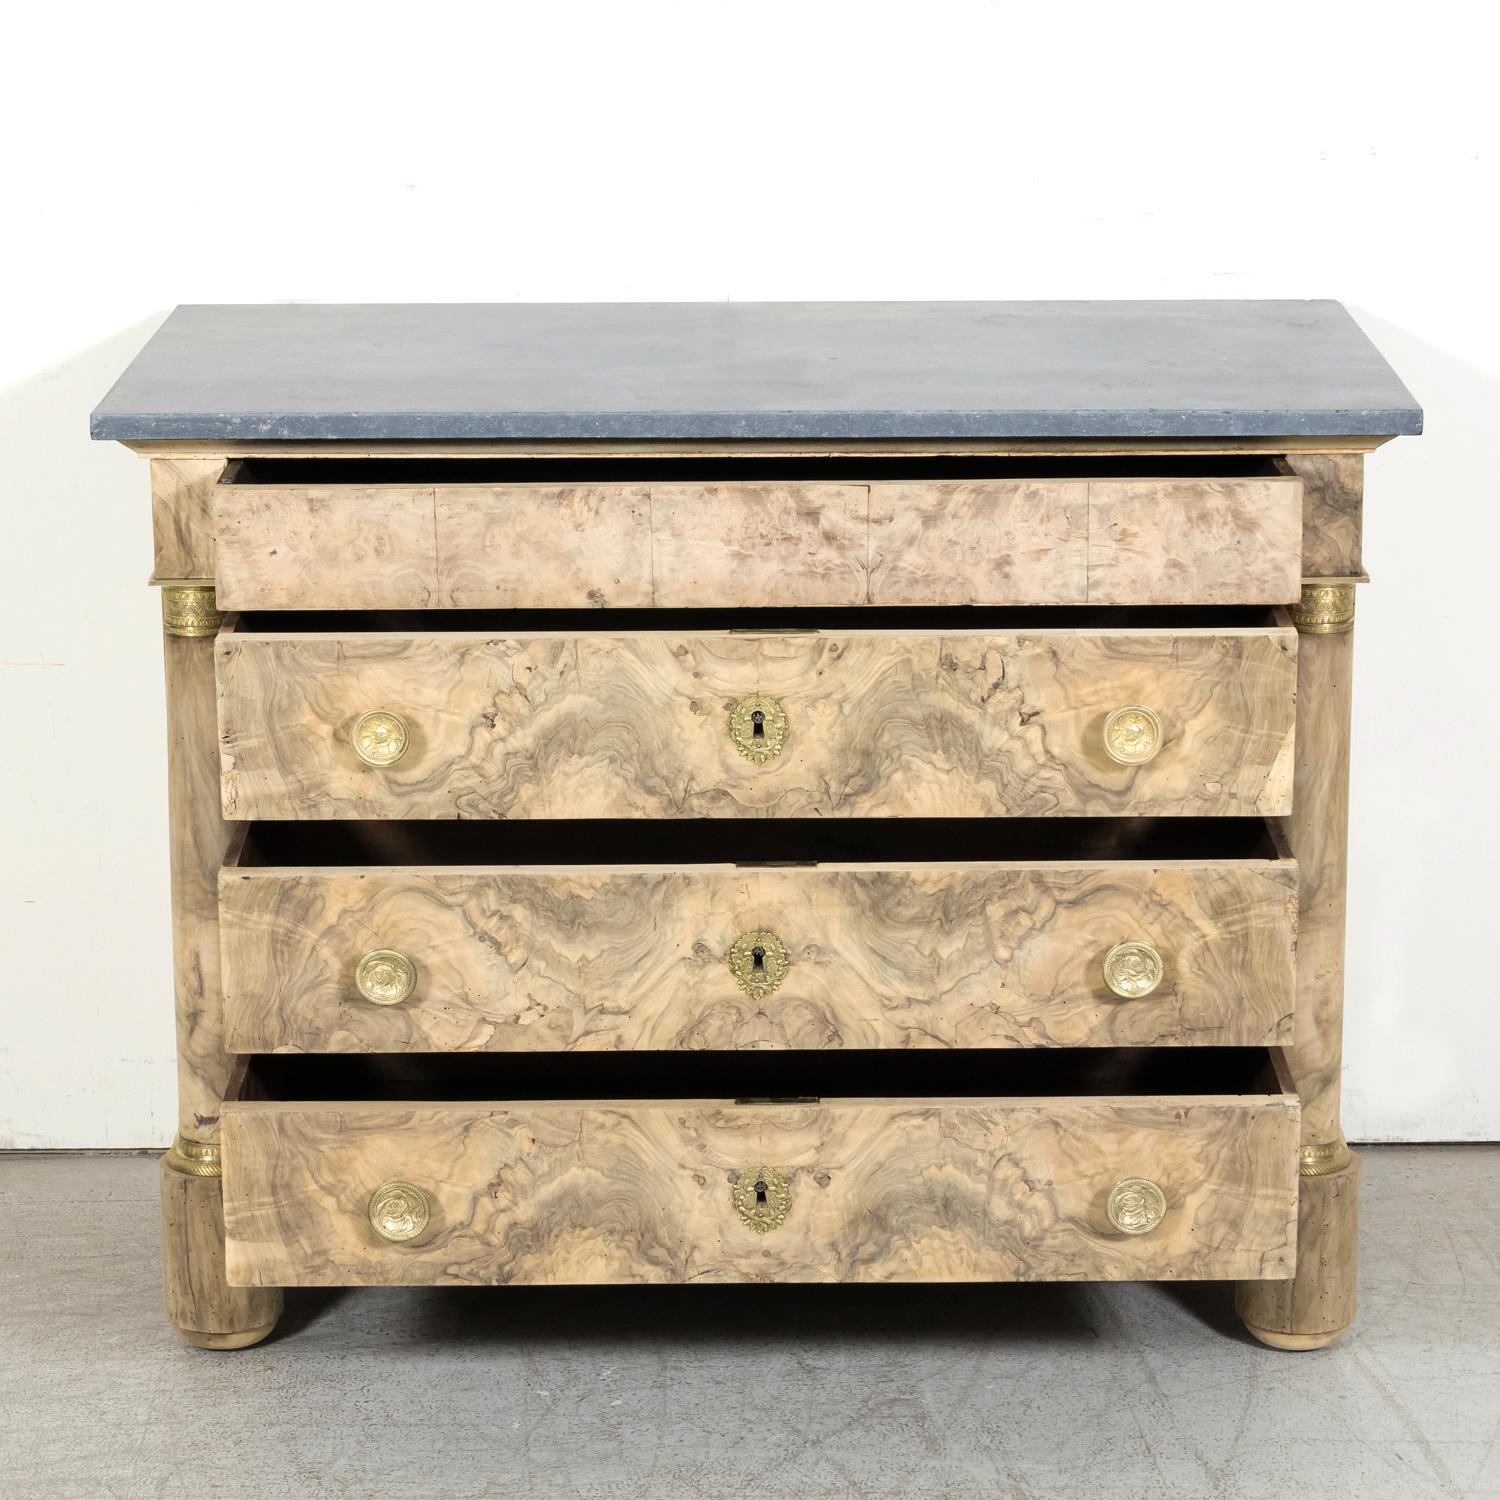 19th Century French Empire Period Bleached Walnut Commode with Marble Top  1